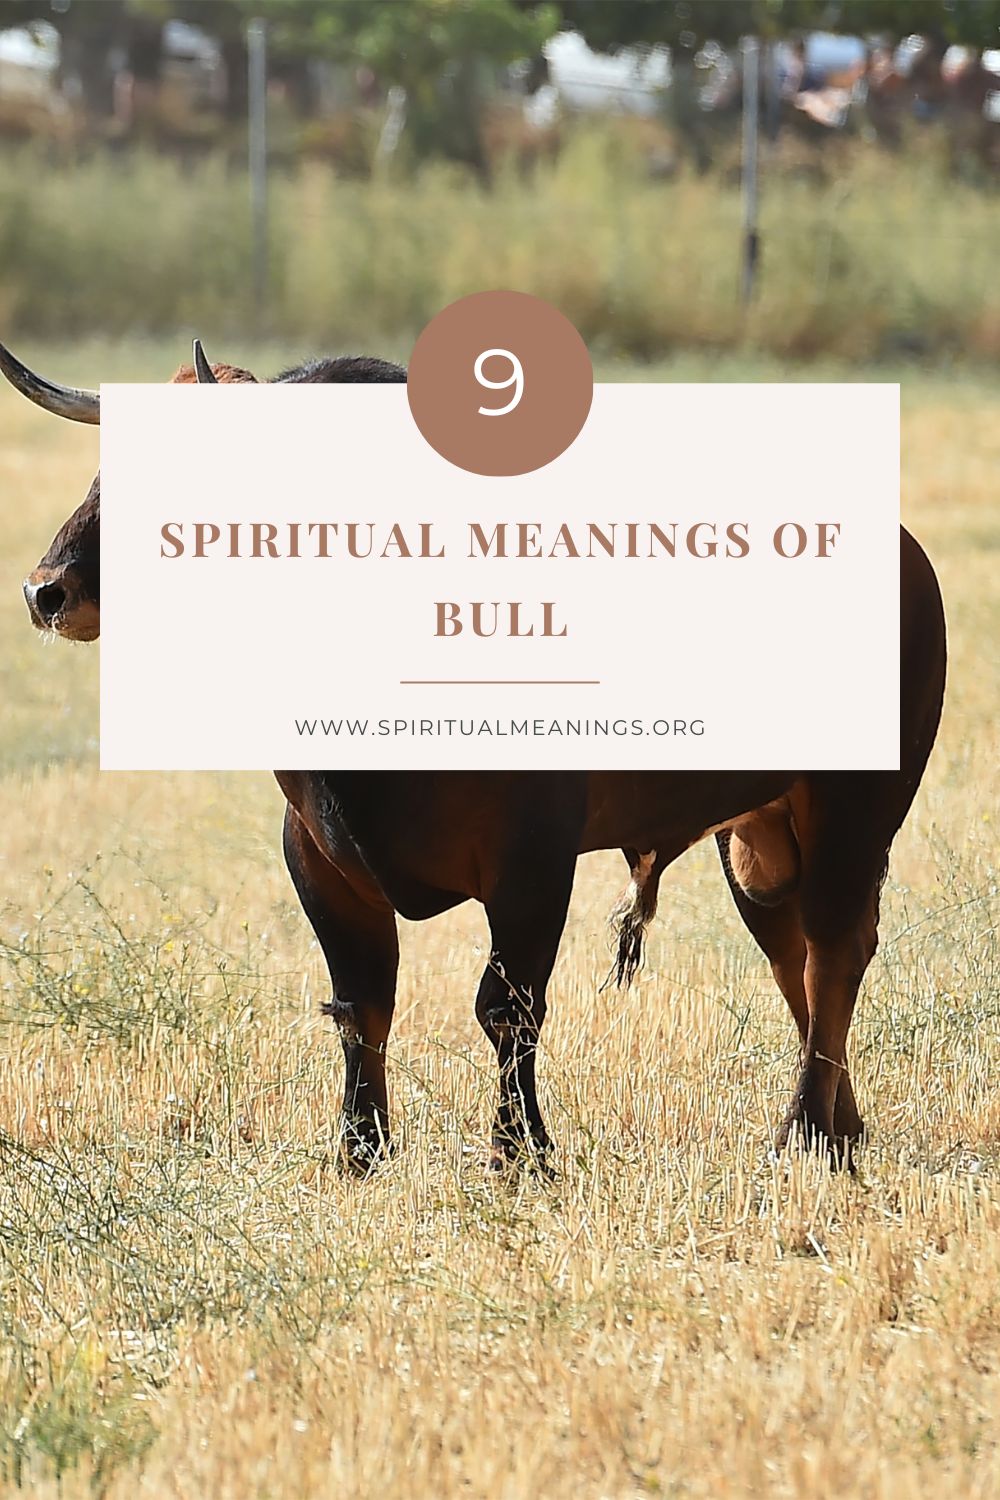 Bull Symbolism and Spiritual Meaning